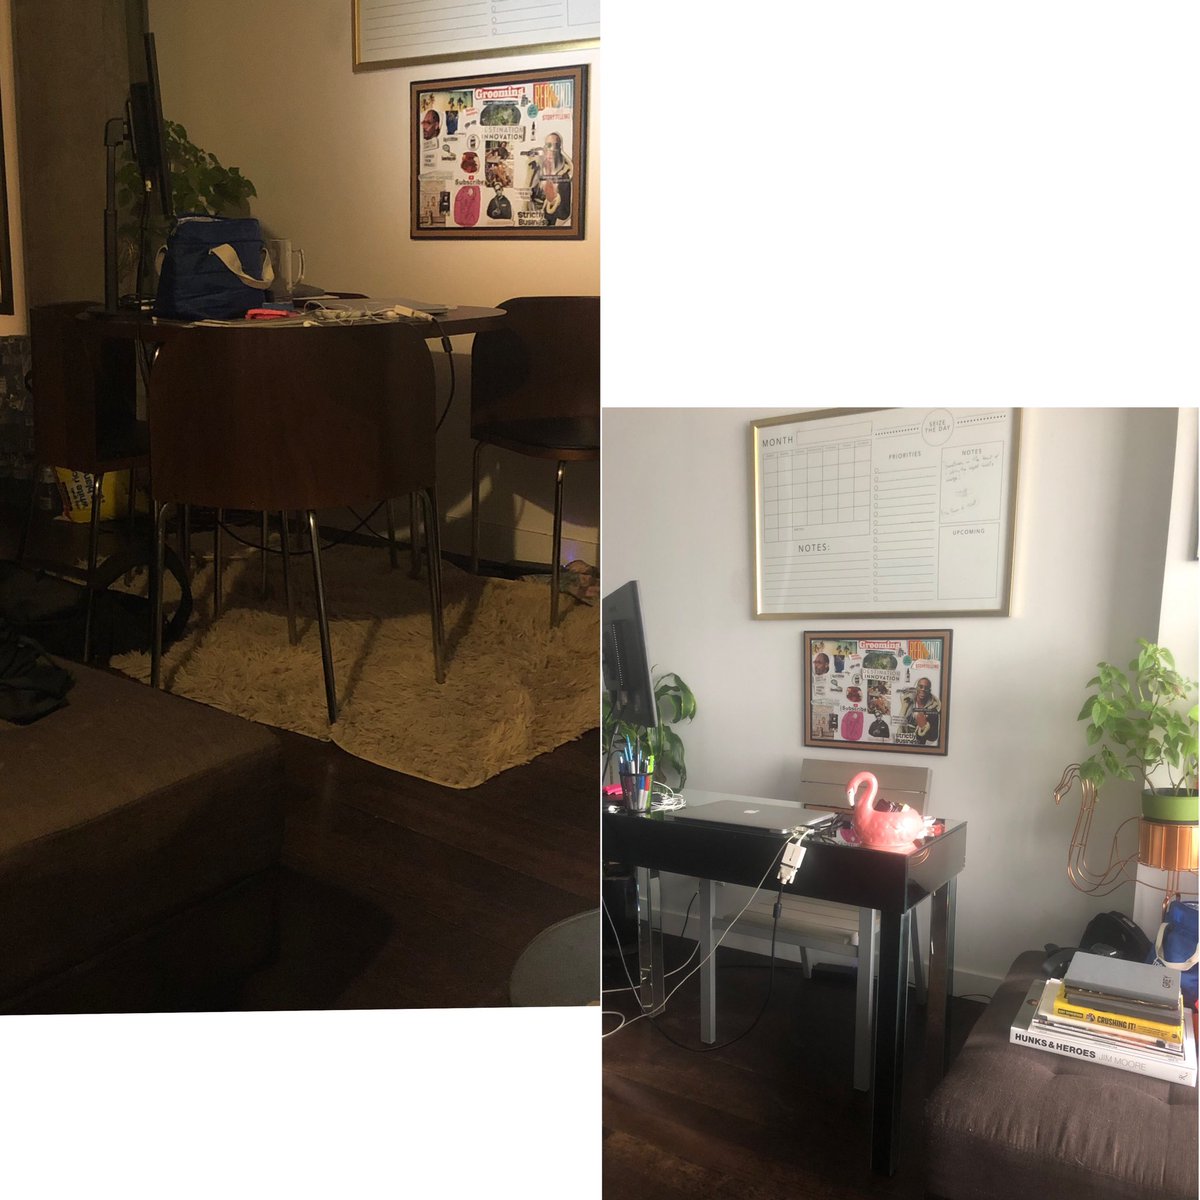 The before & after .. I got rid of my kitchen table because it was more of a work space than anything.. now it finally looks like one. My Led strip lights also came in 